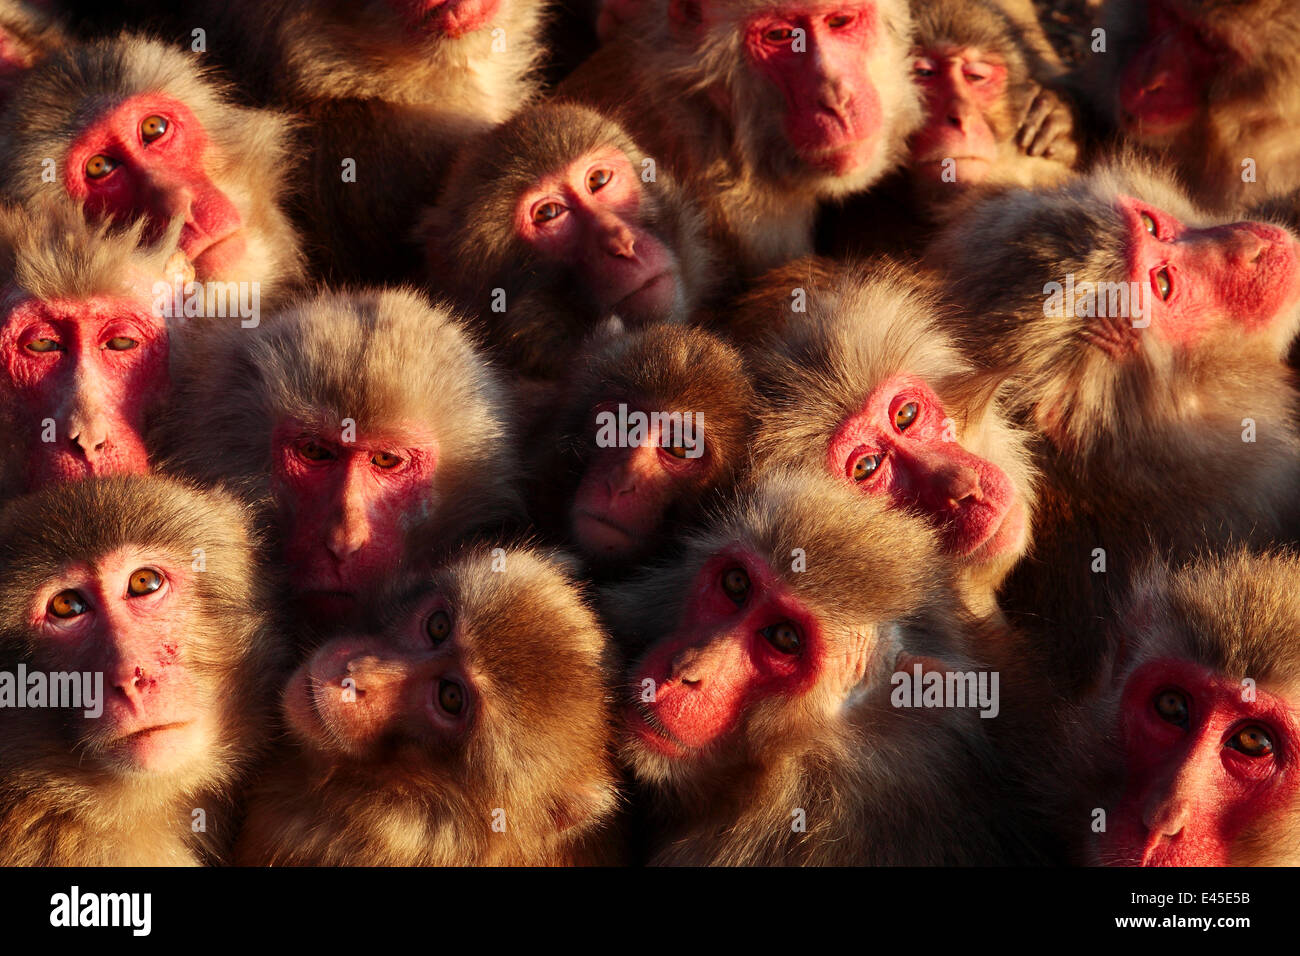 Japanese macaques (Macaca fuscata) faces looking up, huddling together for warmth on a cold day, Shodoshima, Japan Stock Photo